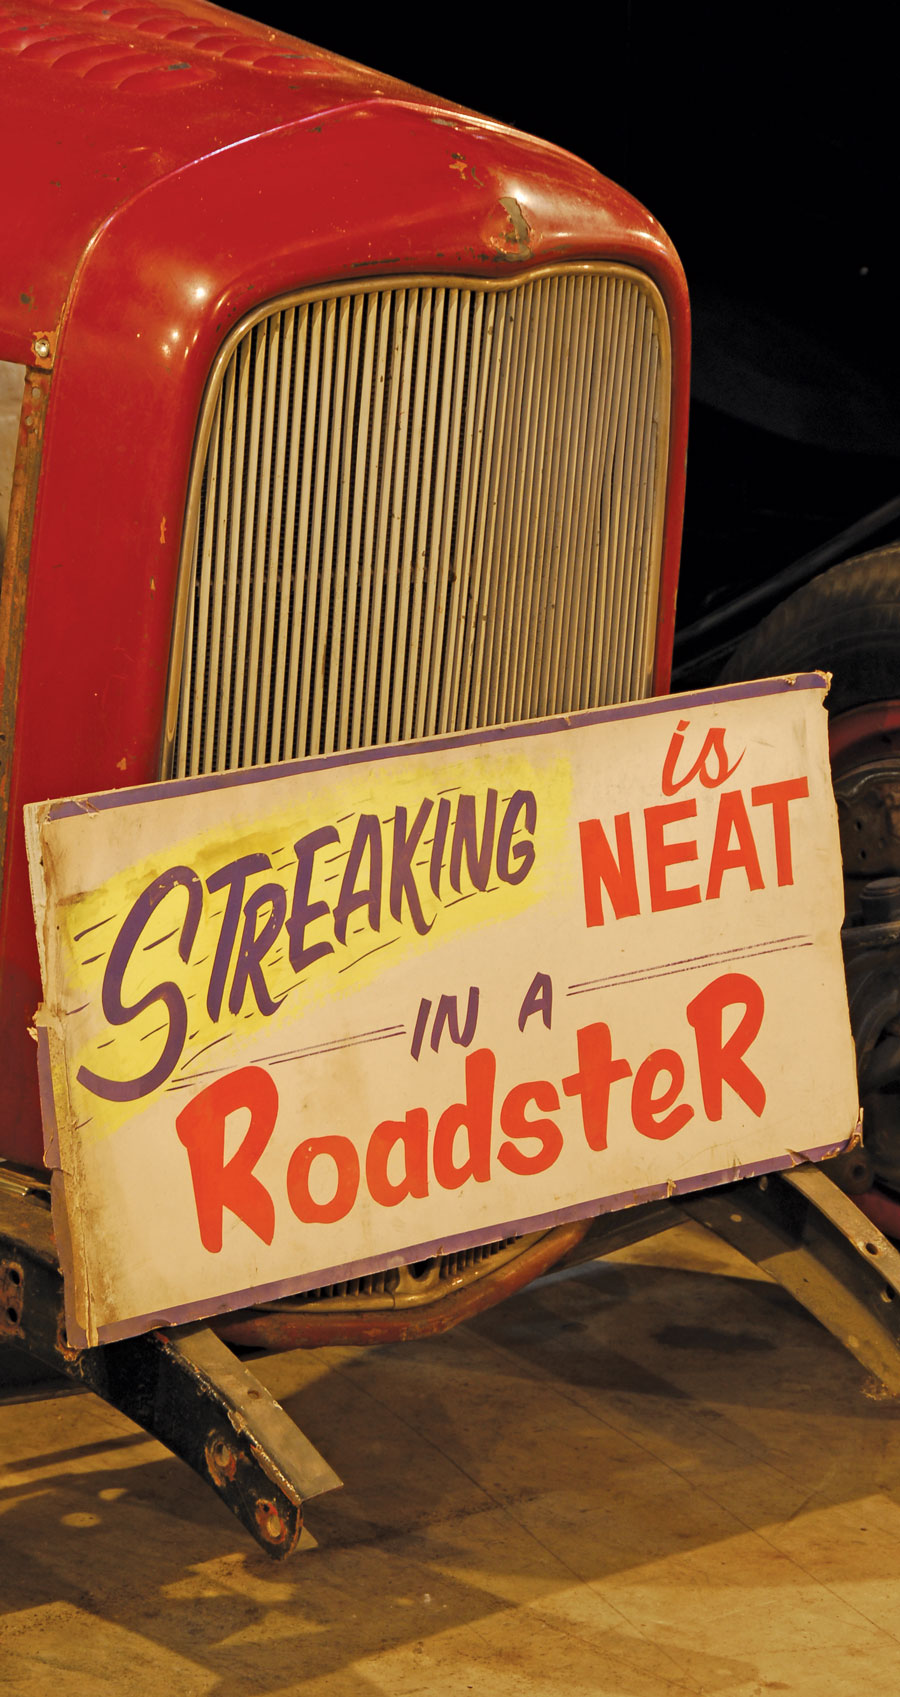 Samples from the Jack Stewart L.A. Roadsters collection certainly set the tone from a fun-filled past